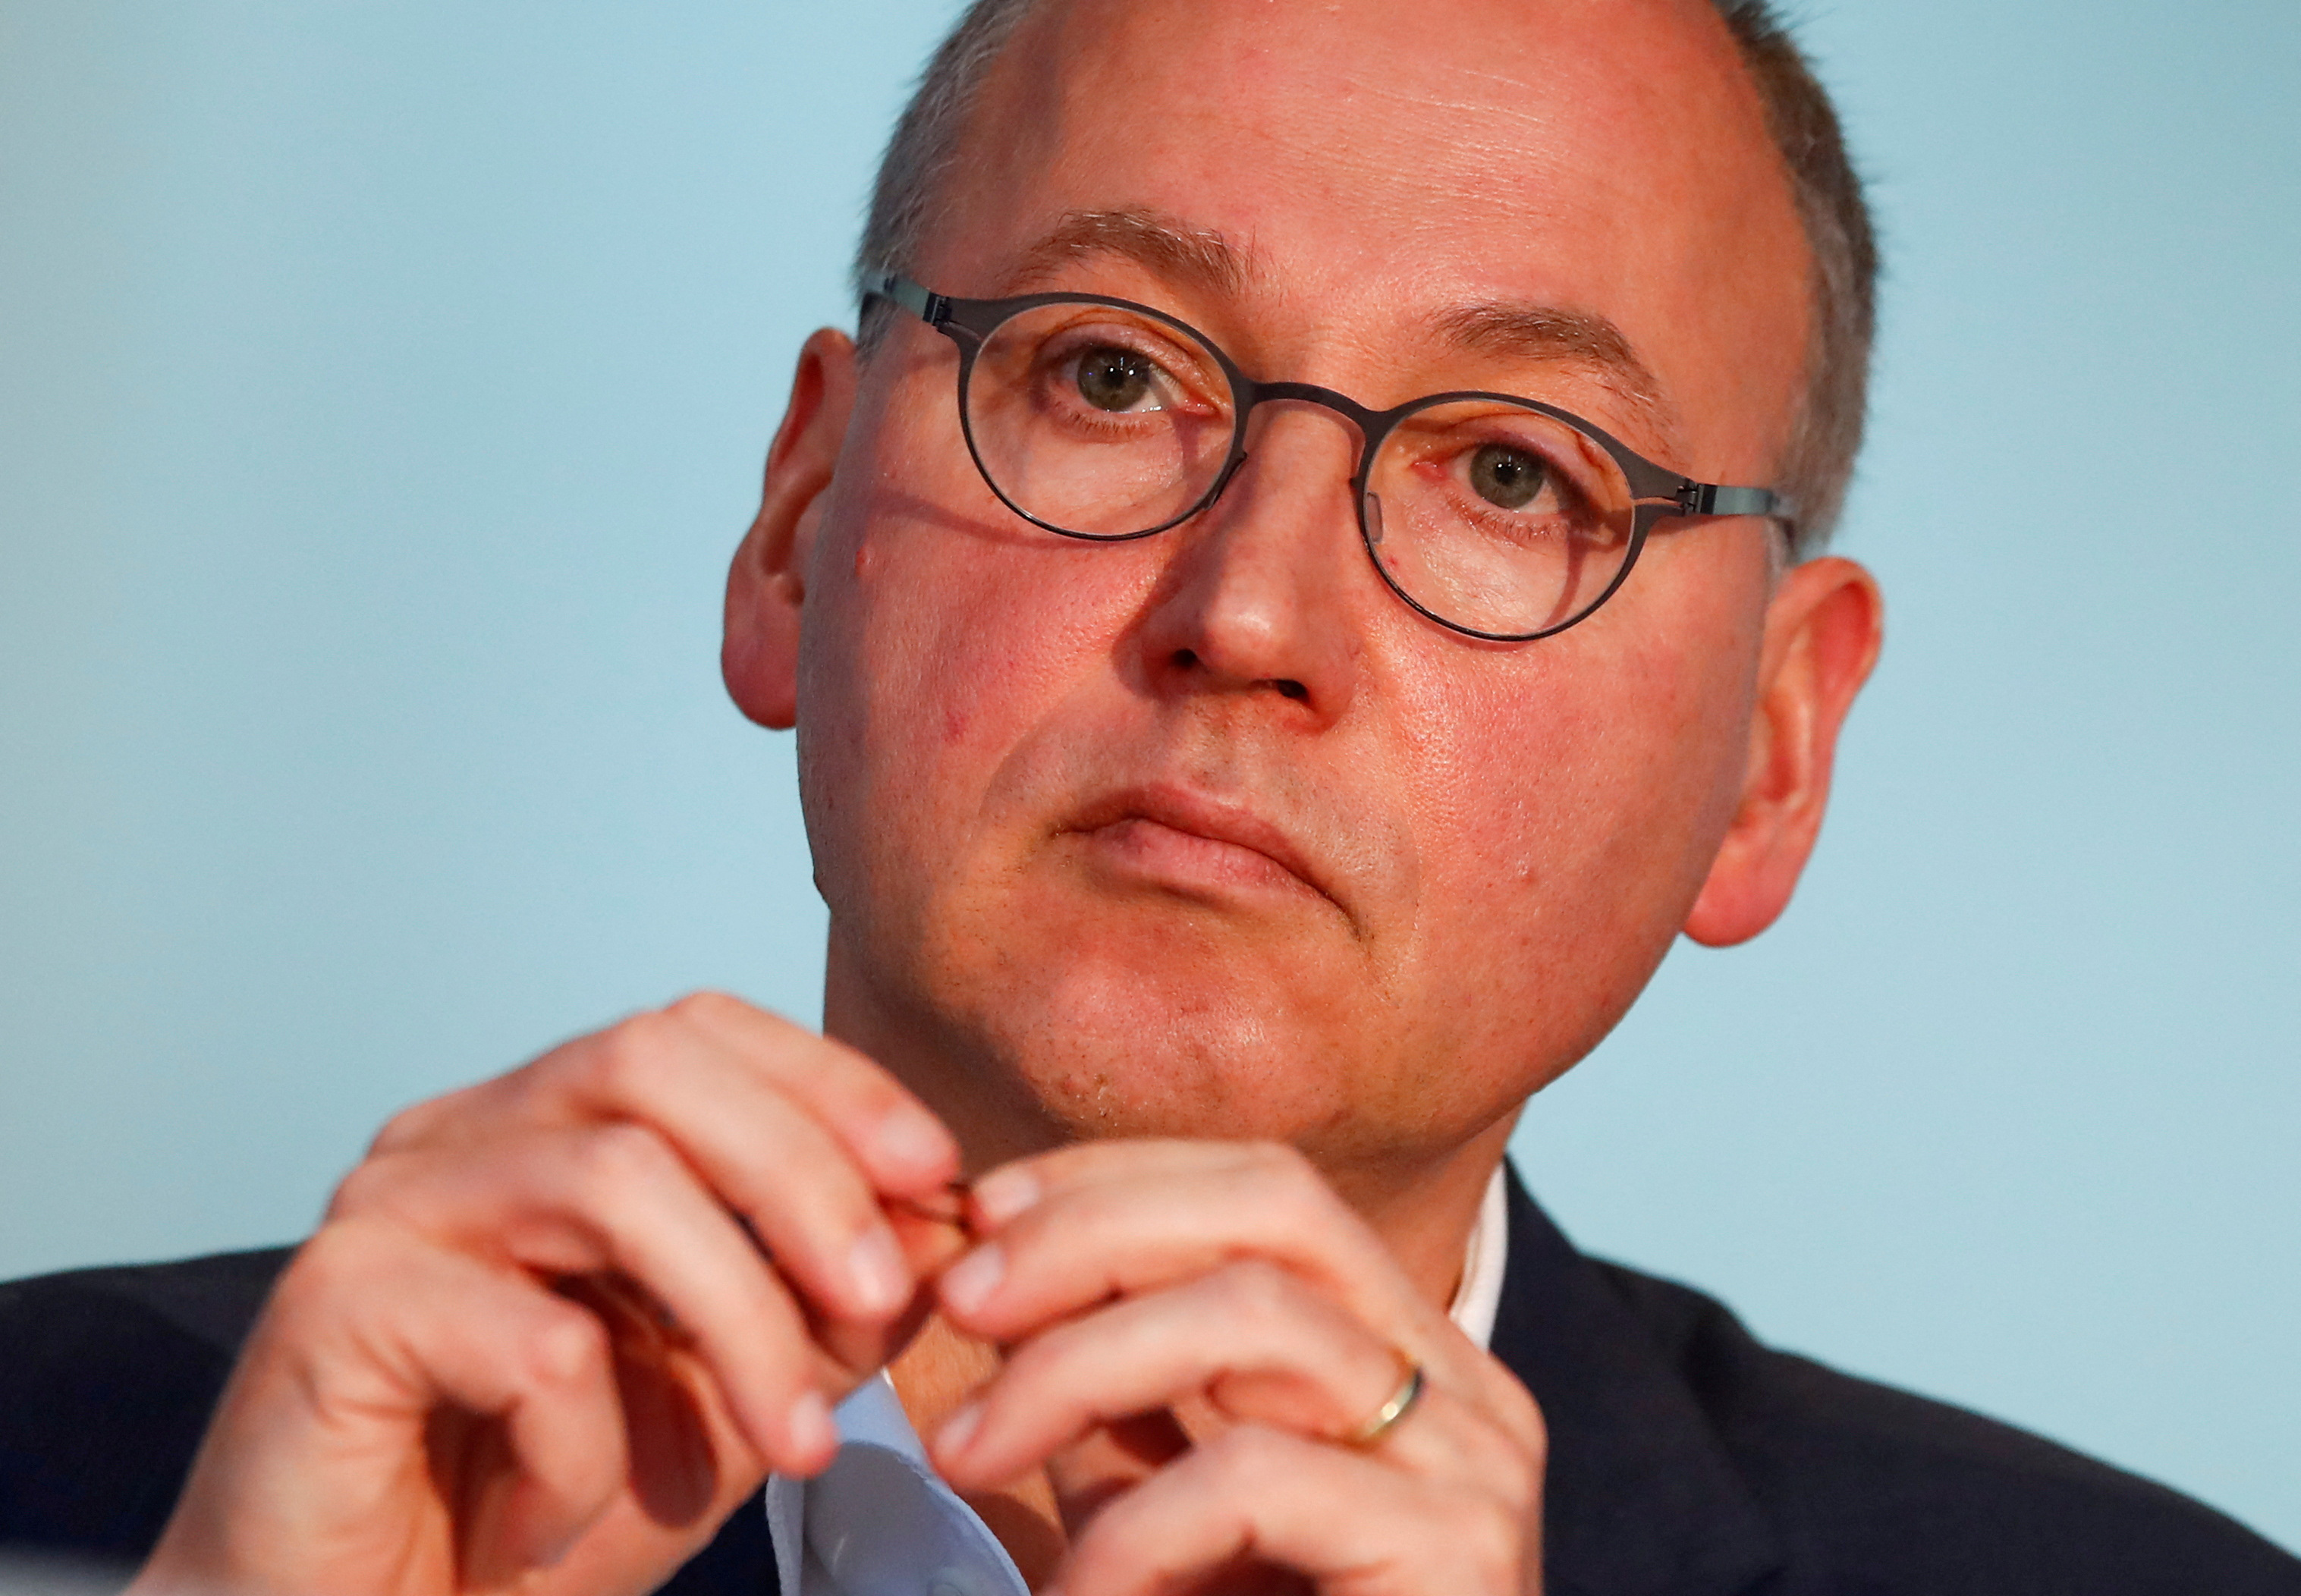 Bayer CEO Werner Baumann at the company's annual results news conference